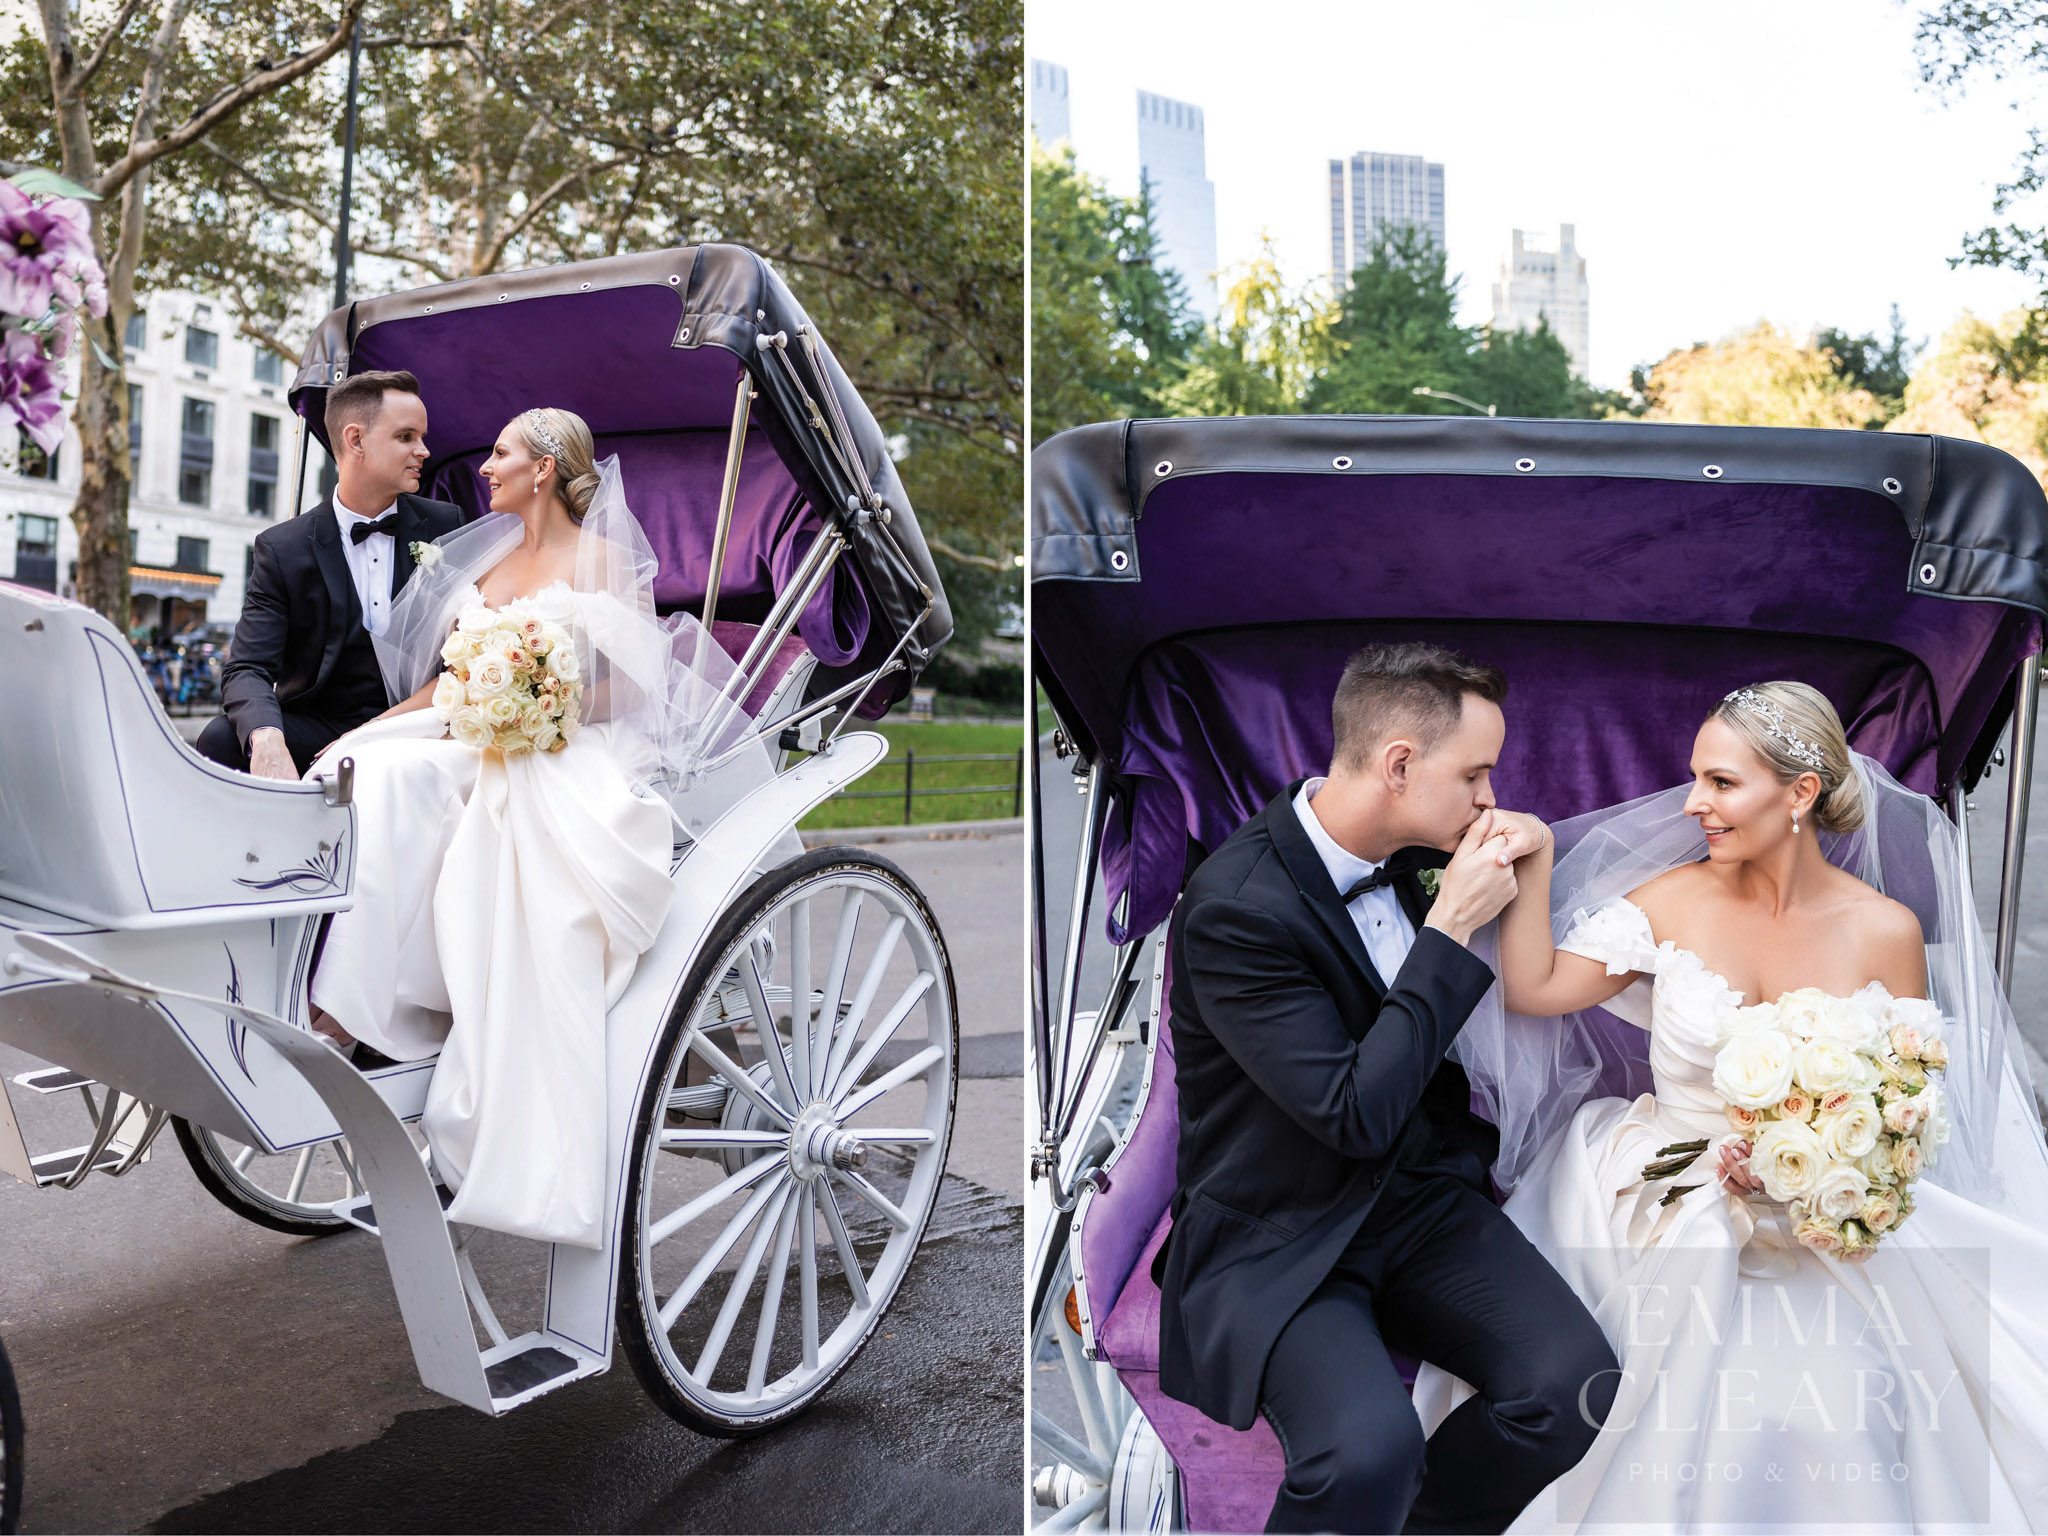 The bride and groom in the carriage